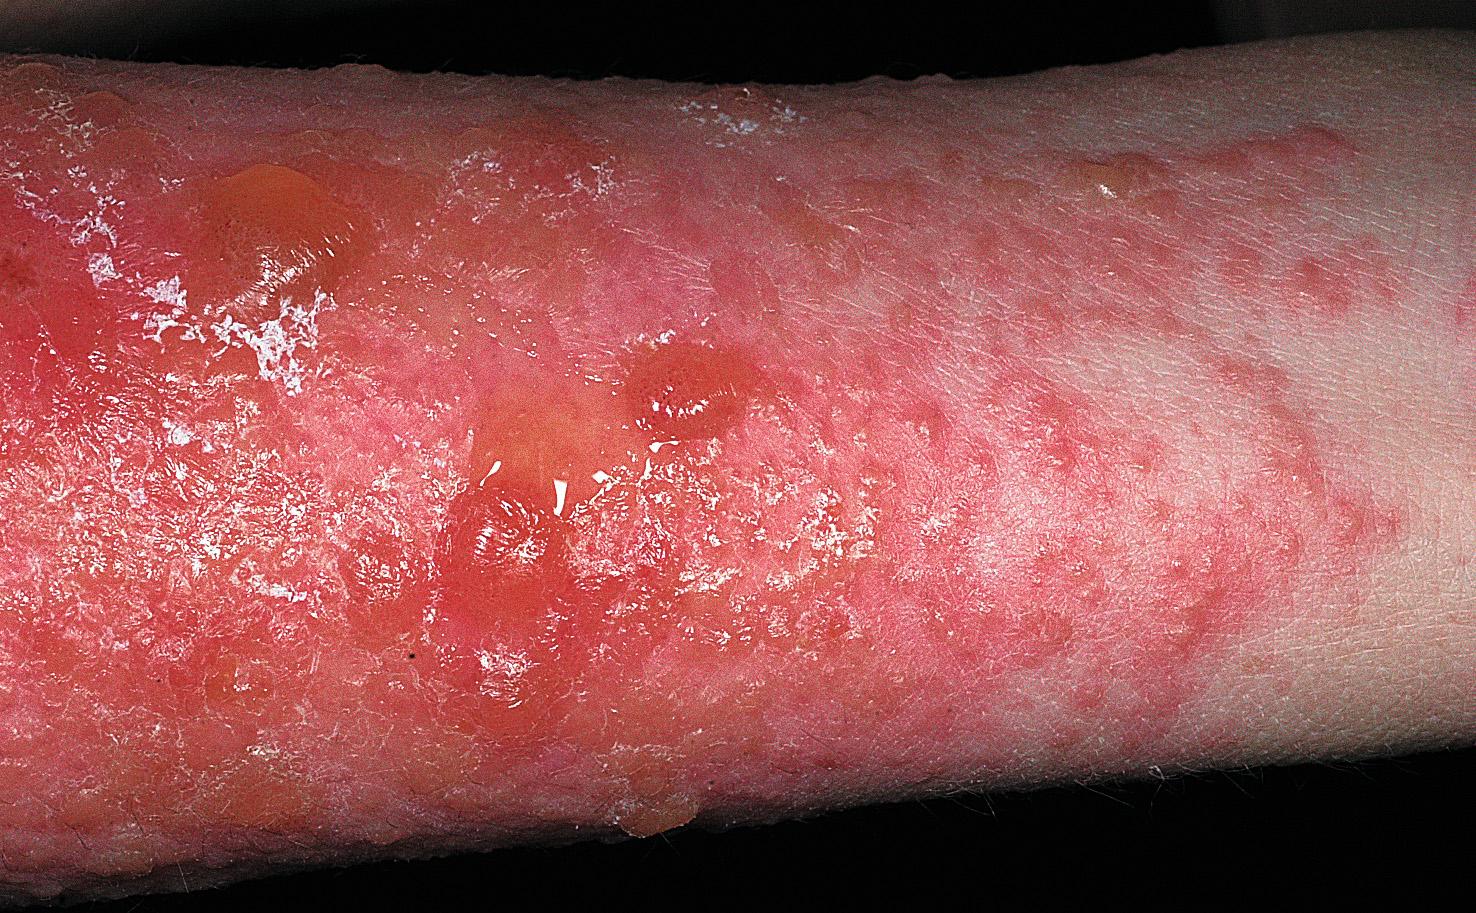 Fig. 2.12, Poison ivy with severe, intense, acute eczematous inflammation and large confluent blisters. Many blisters have ruptured. The serum that leaks onto the skin does not spread poison ivy. Cool wet compresses applied for 30 minutes several times a day help to control the inflammation.